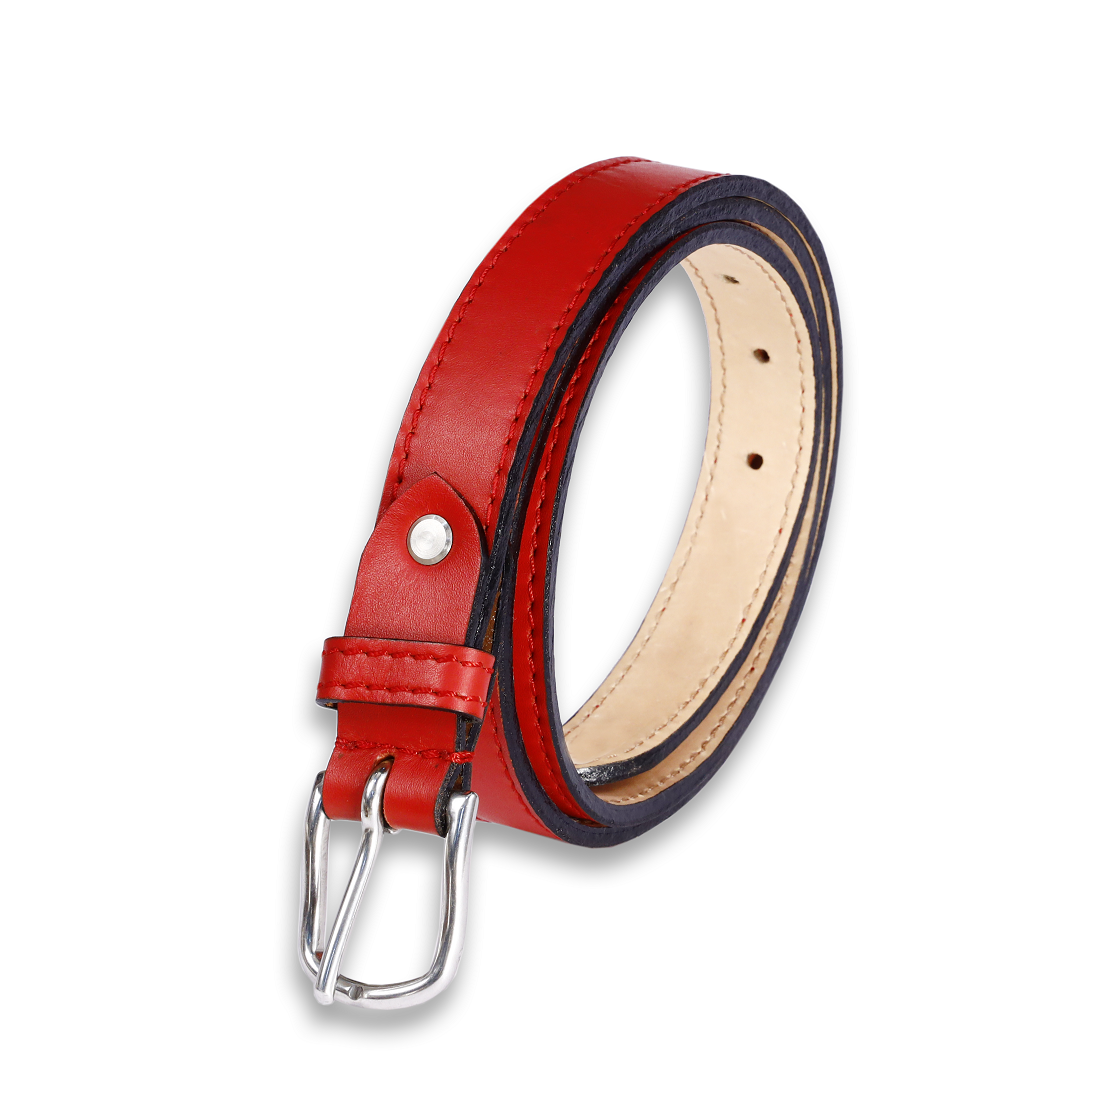 Bhokals Women Solid Red Leather Belt